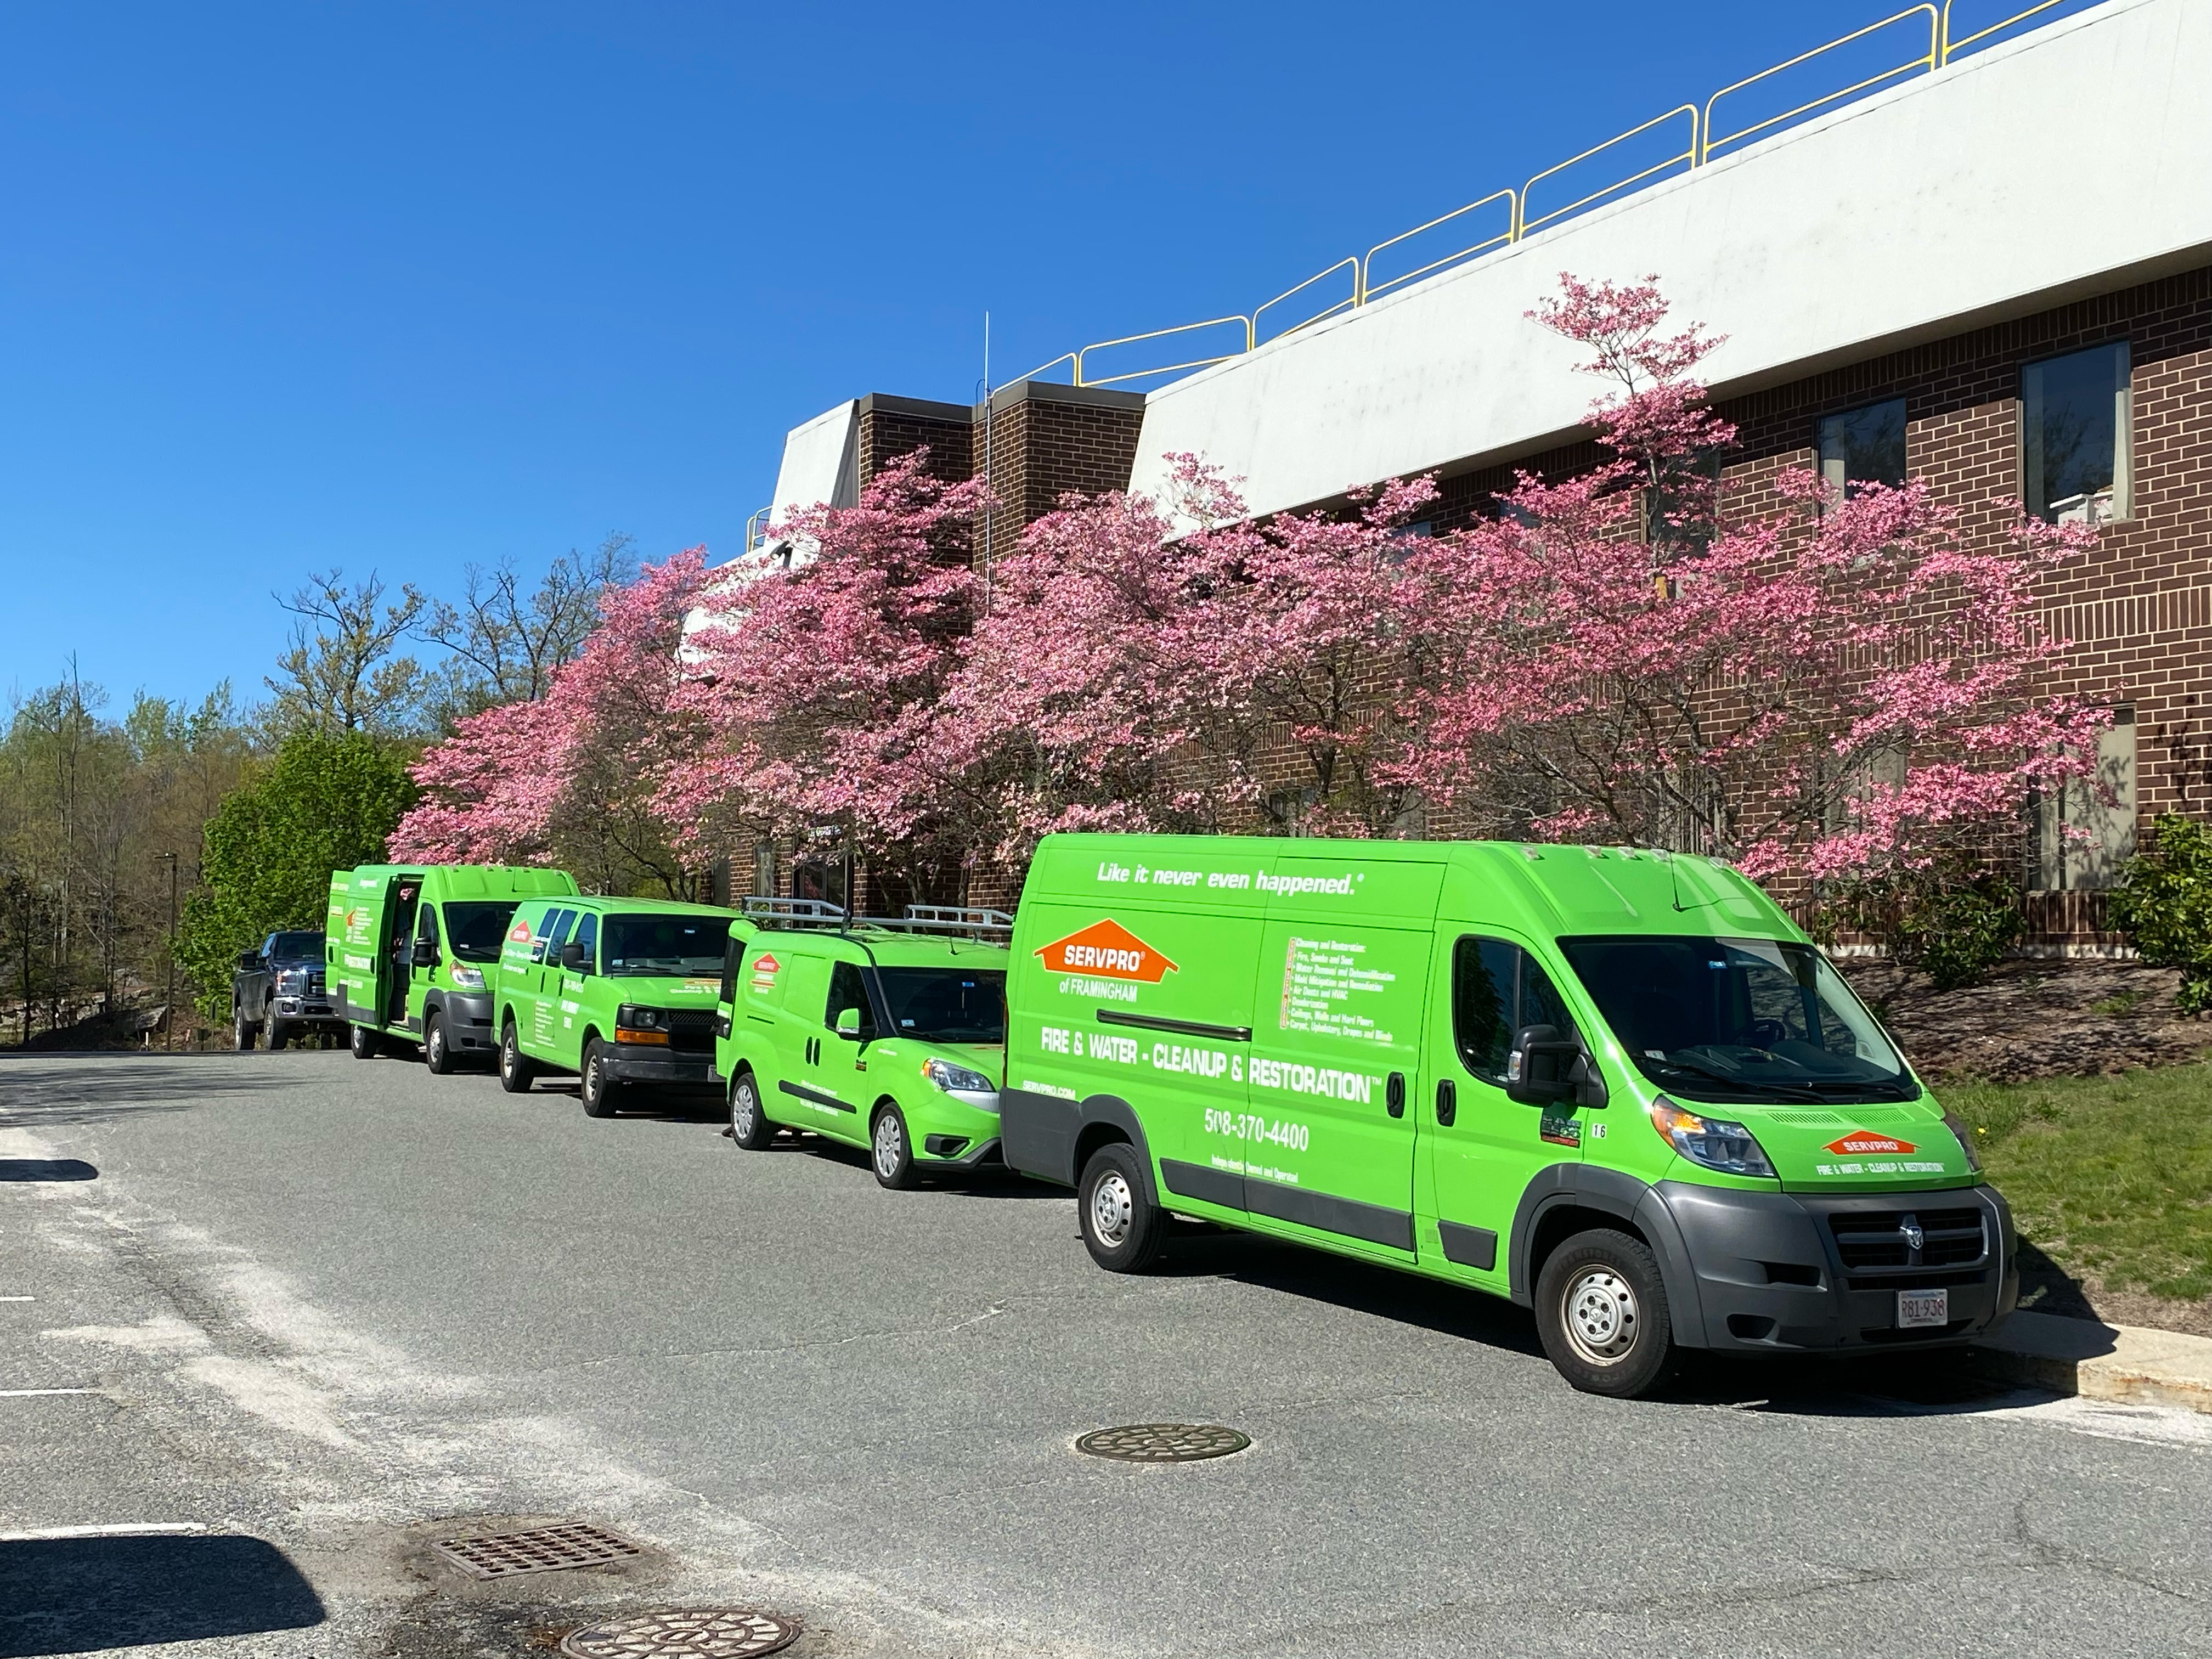 Both the Disaster Remediation and Rebuild Teams of SERVPRO of Natick/Milford are highly skilled and professional.